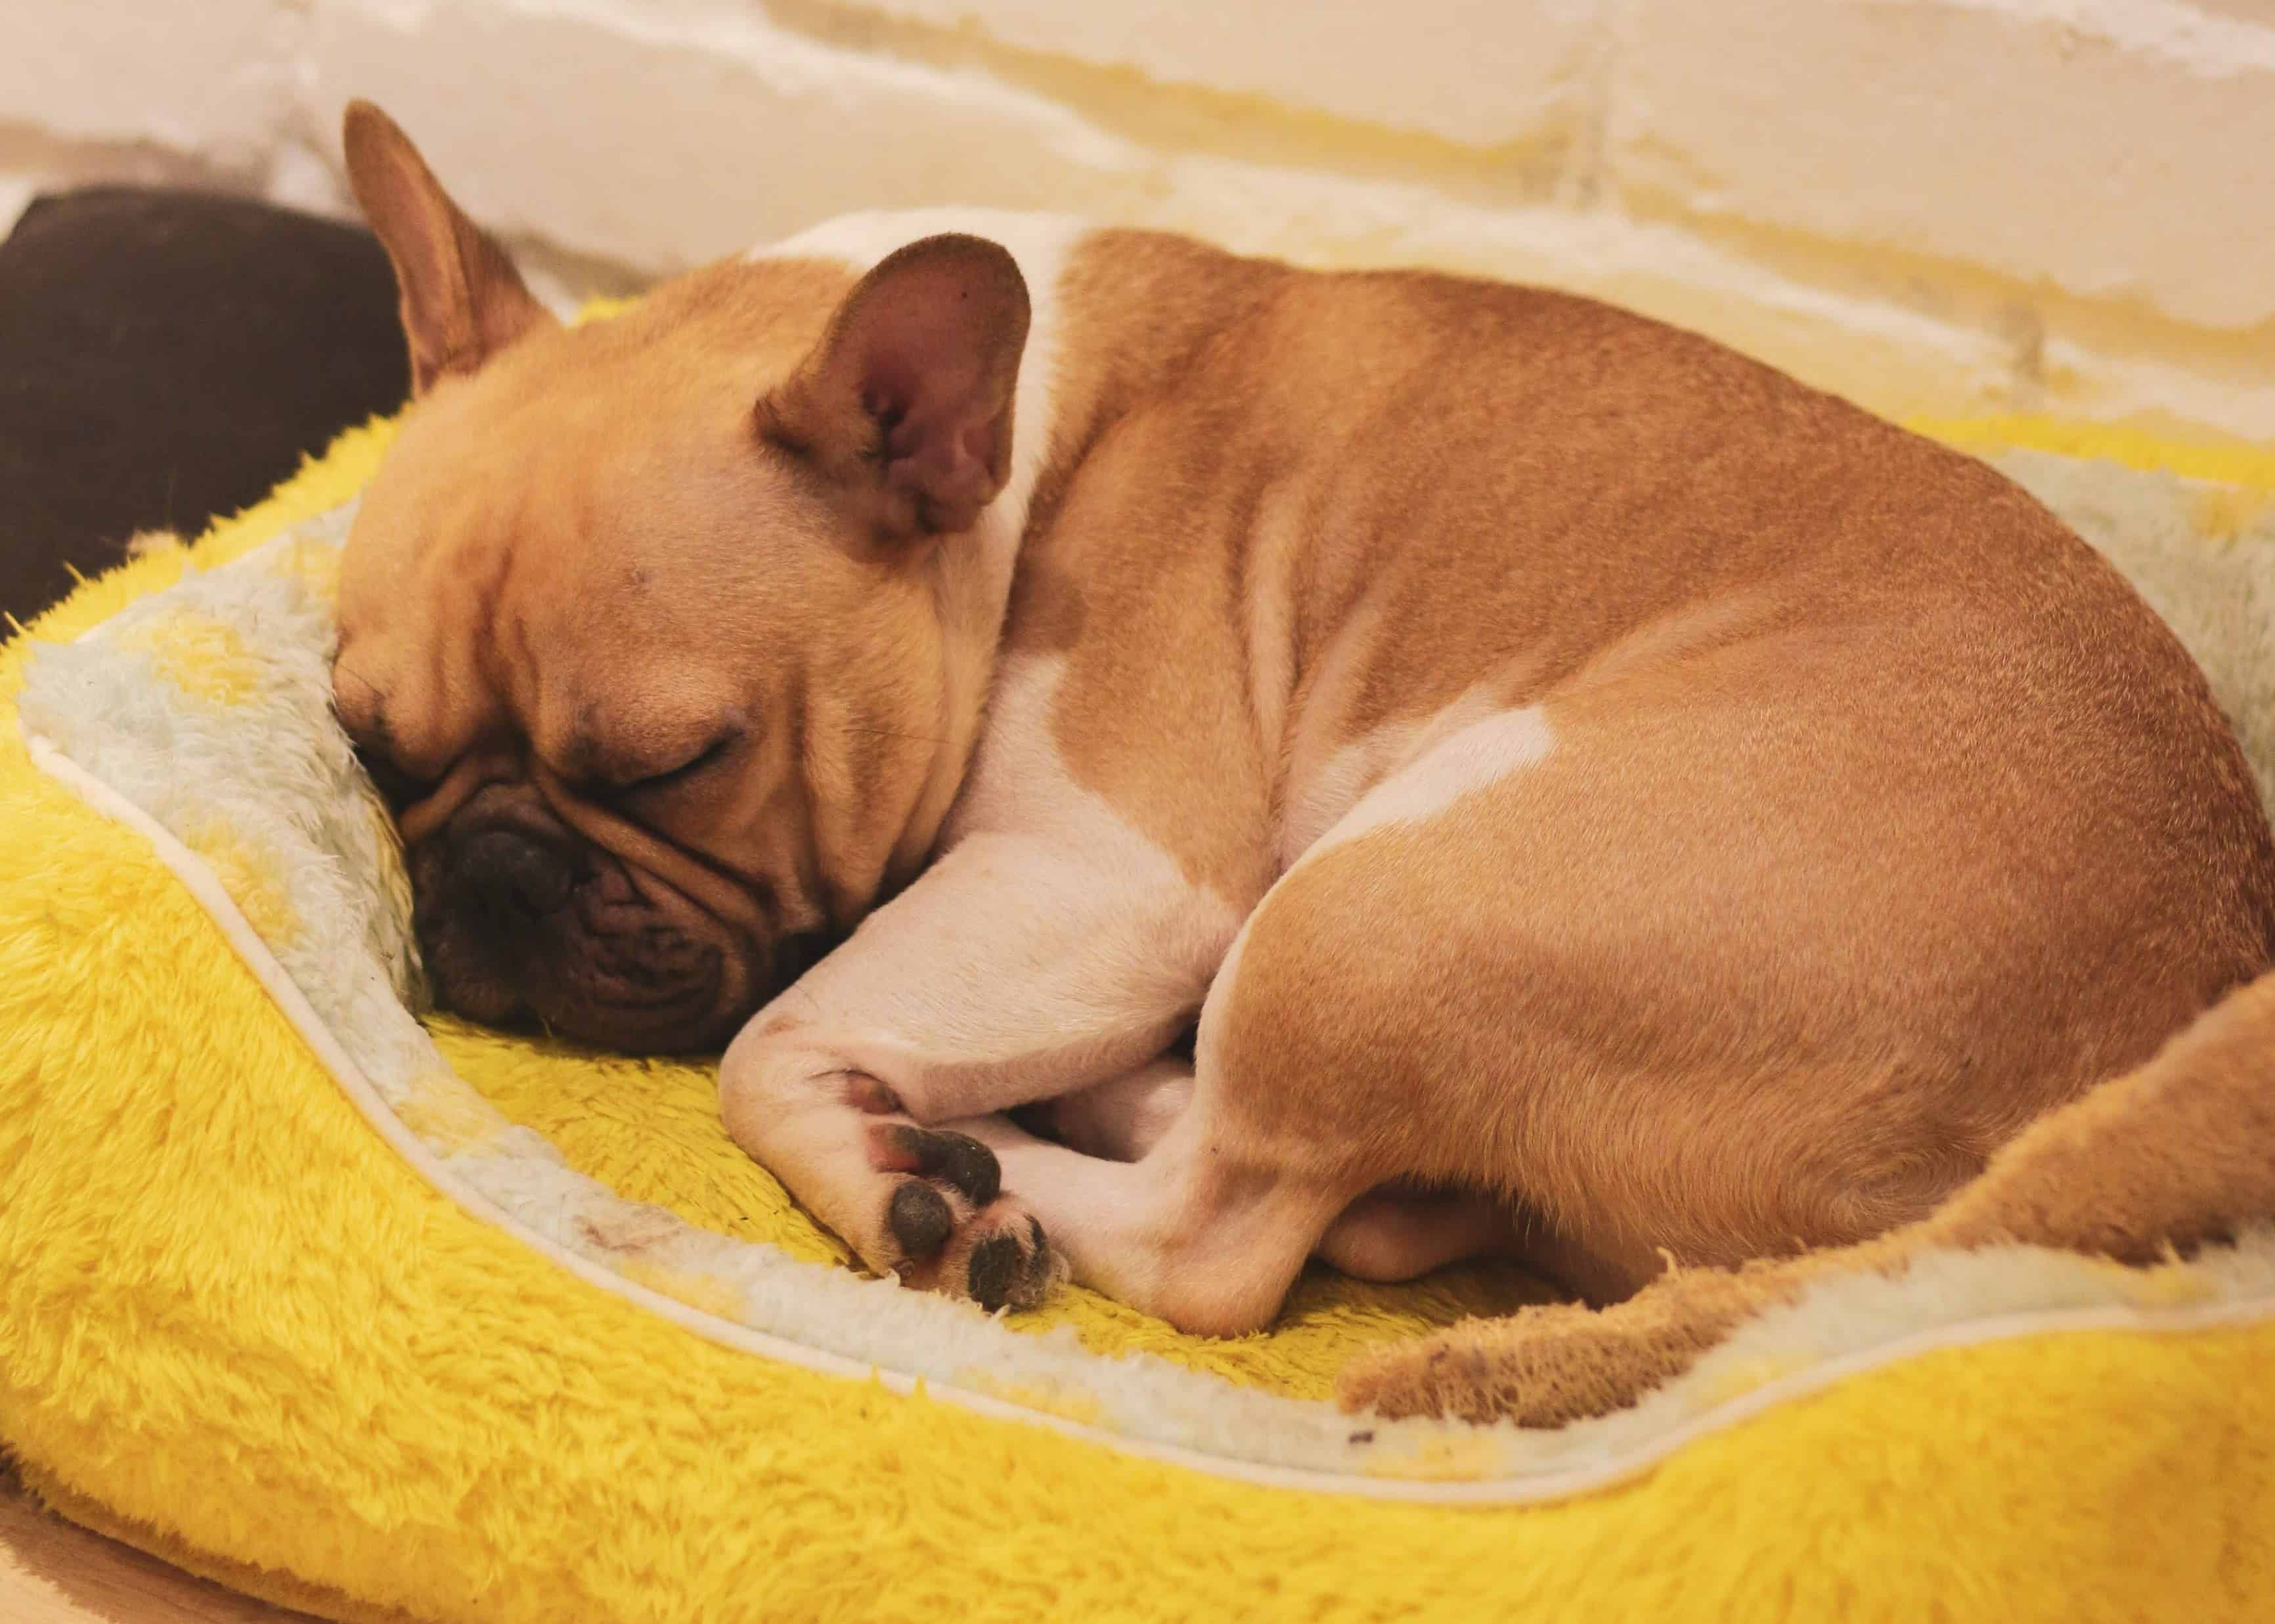 A white and chestnut colored french bulldog, peacefully sleeping in a yellow dog bed.